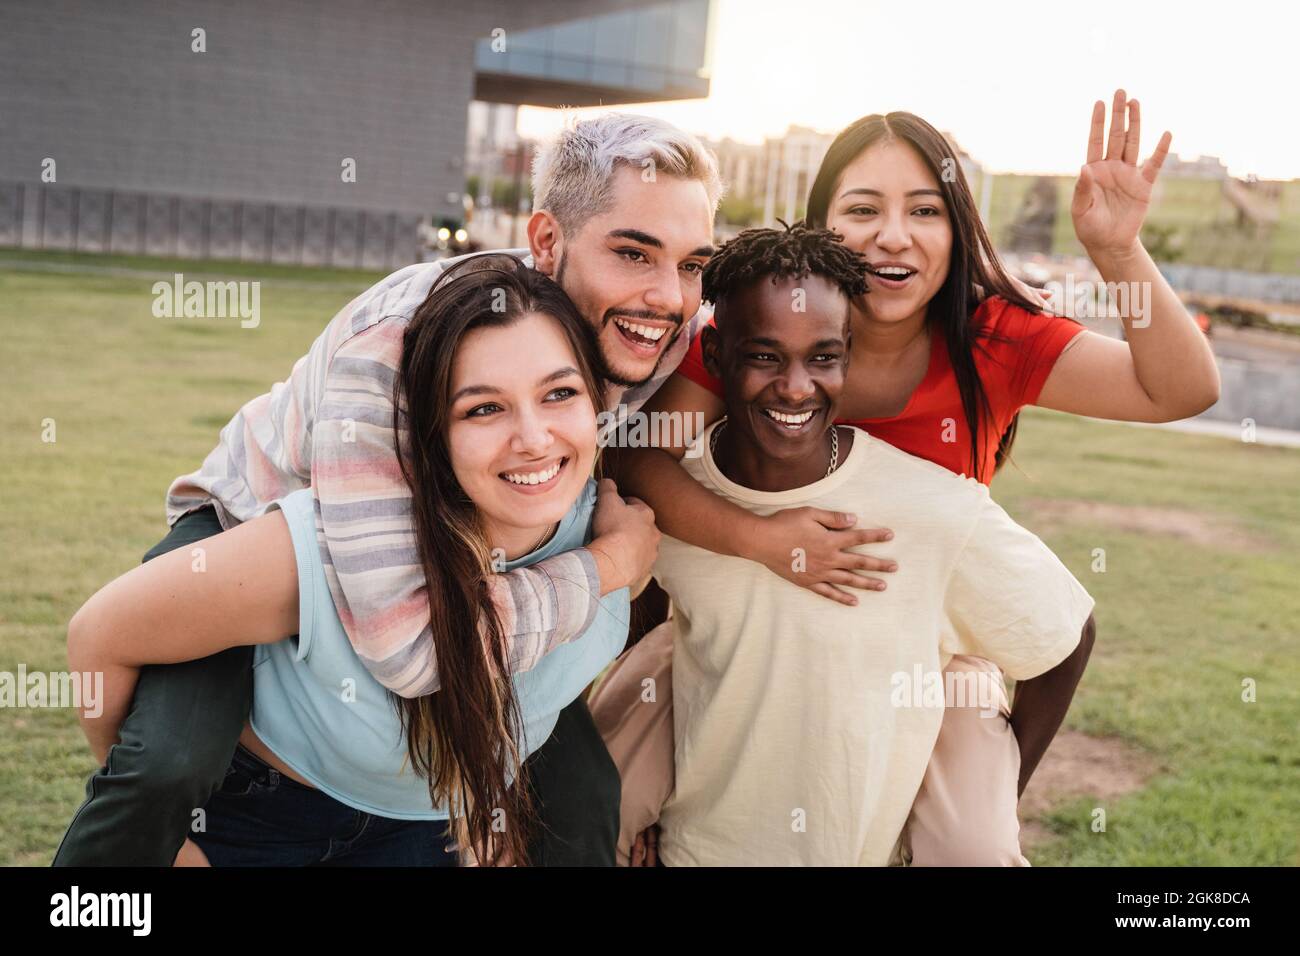 Young diverse people having fun together outdoor at city park - Focus on left girl face Stock Photo